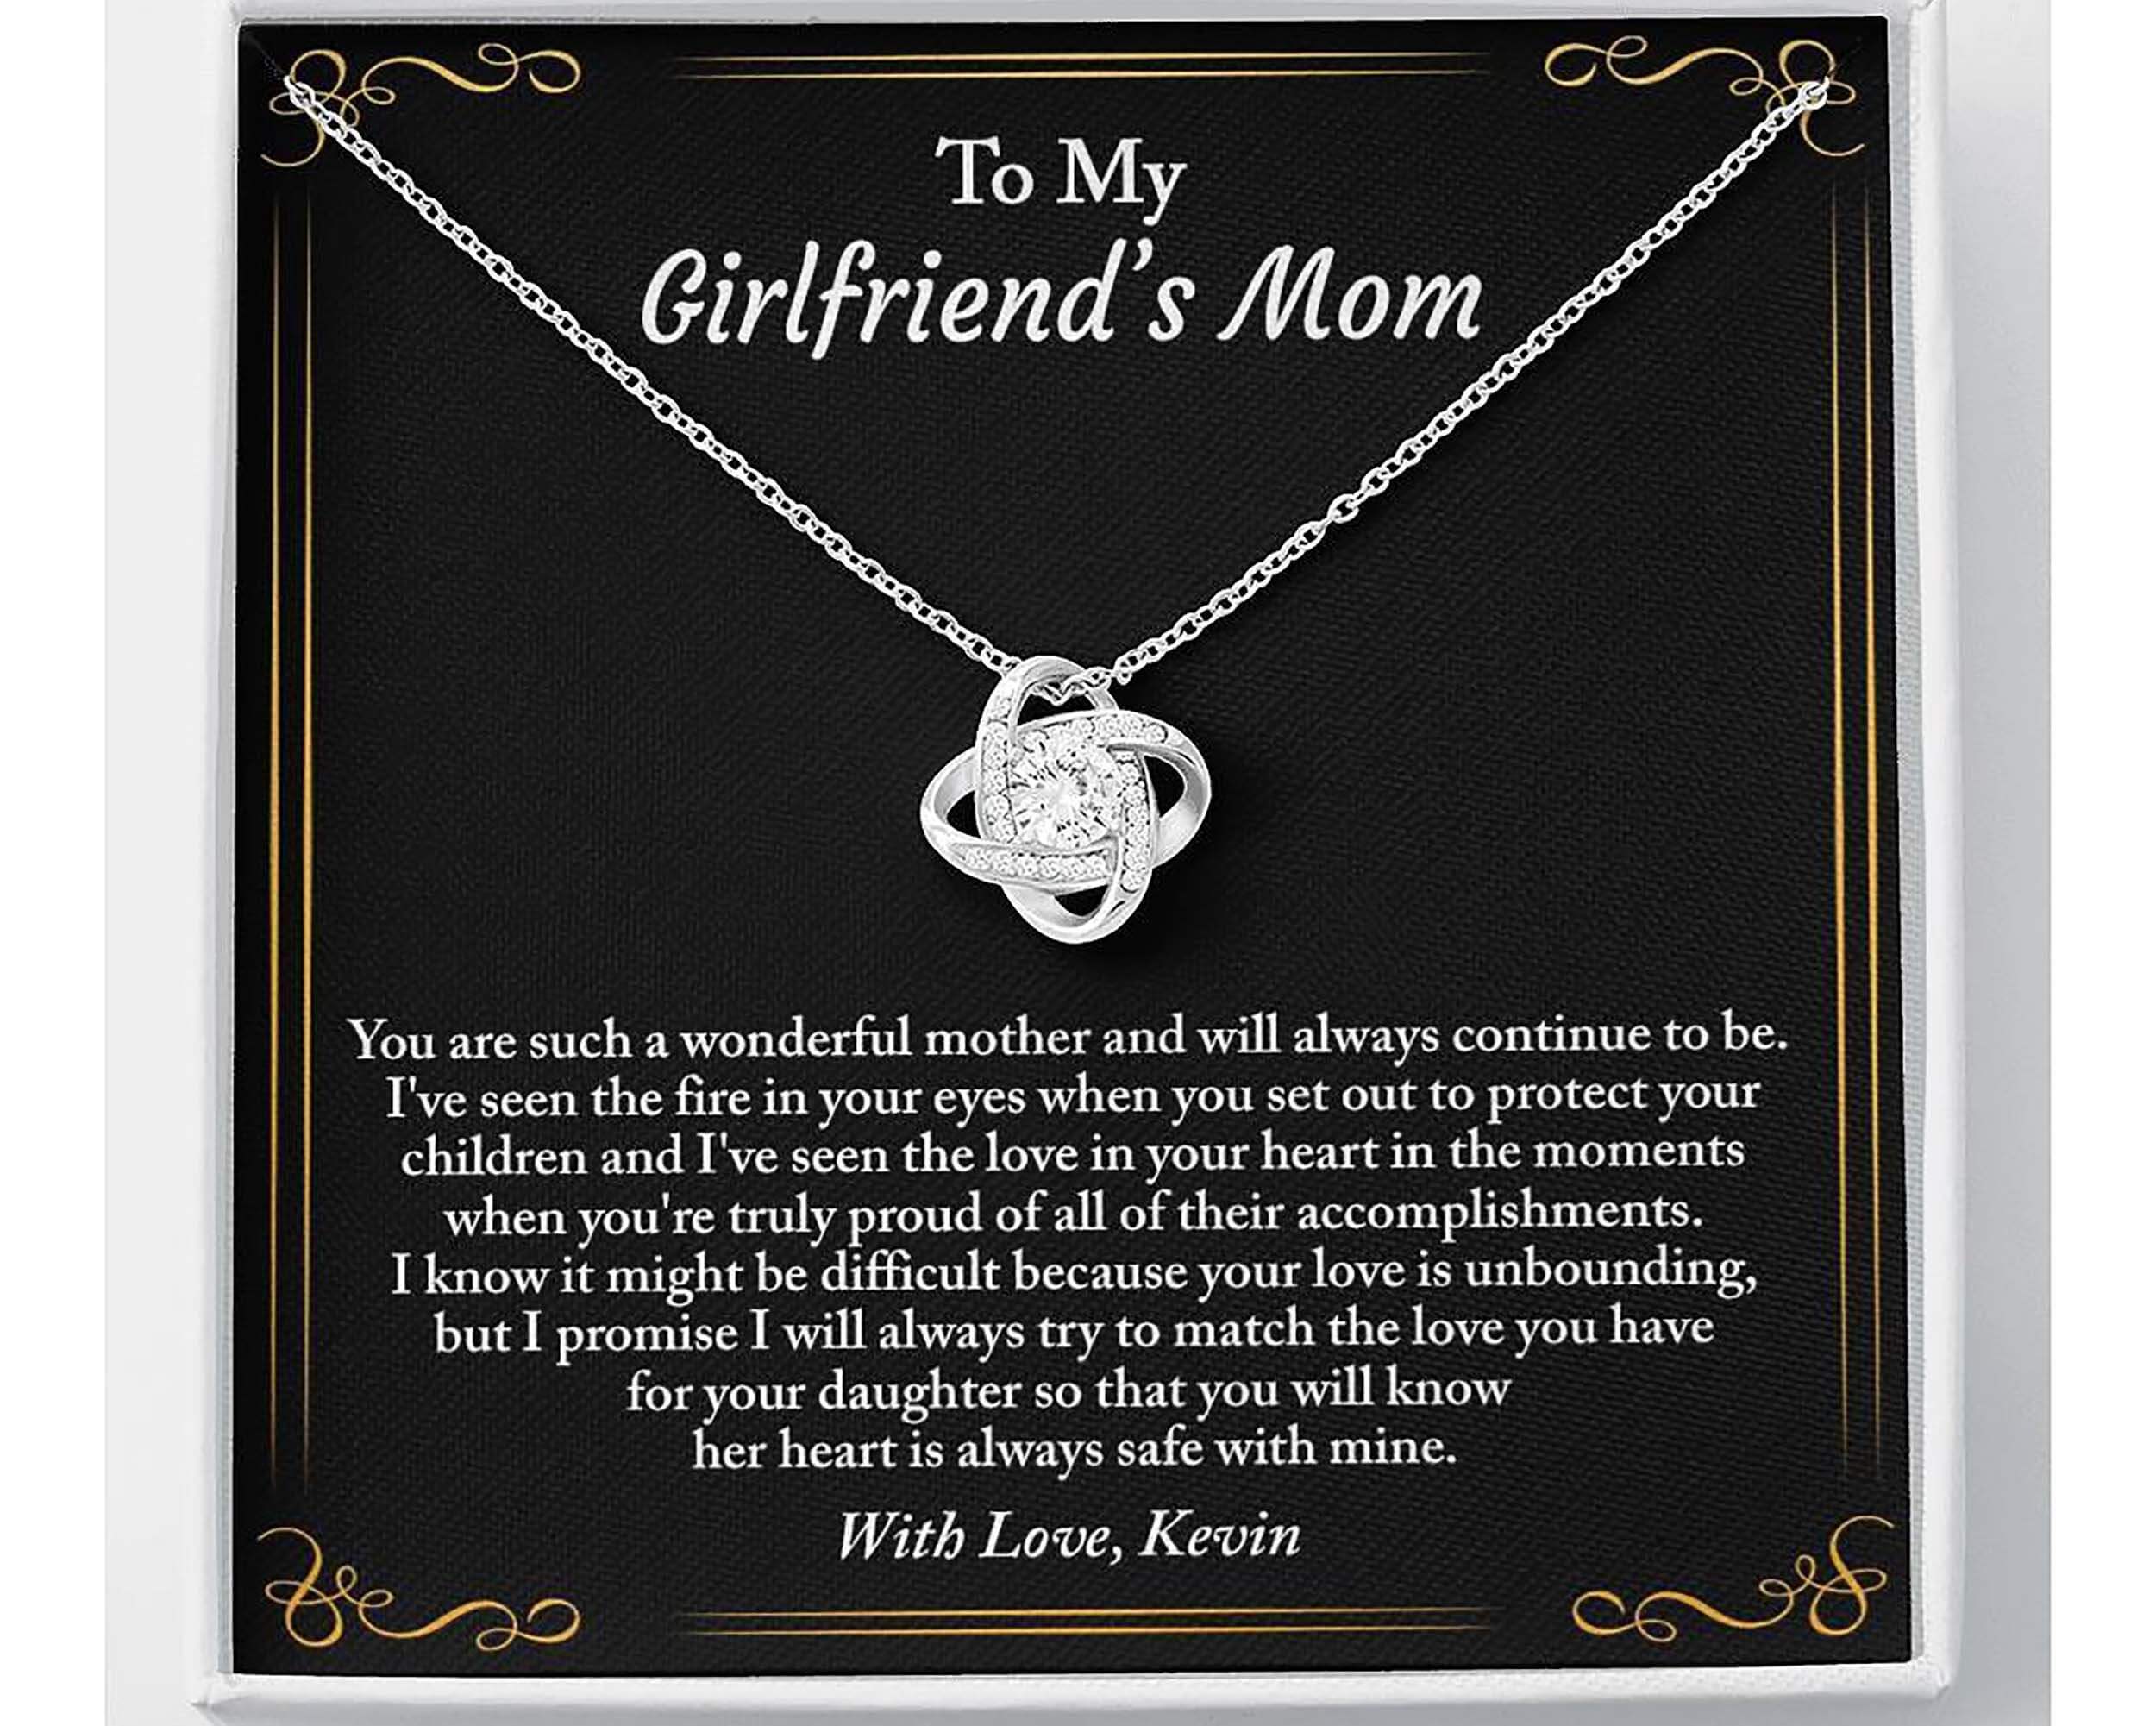 Gifts for Girlfriend's Mom